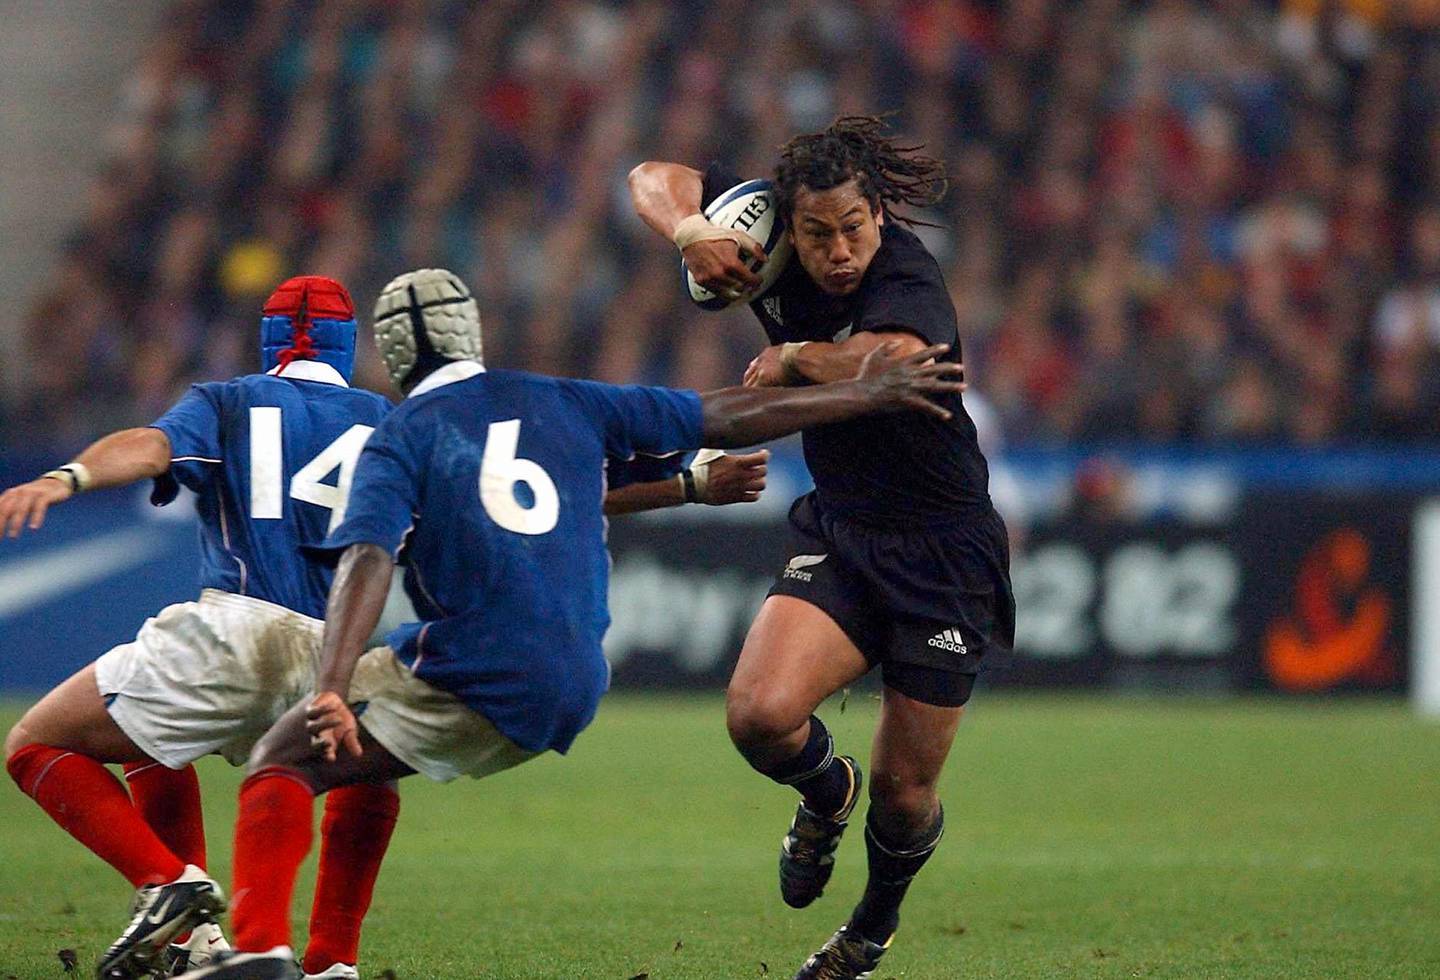 Leading compression garment supplier SKINS have signed one of the most  respected players in world rugby Tana Umaga.